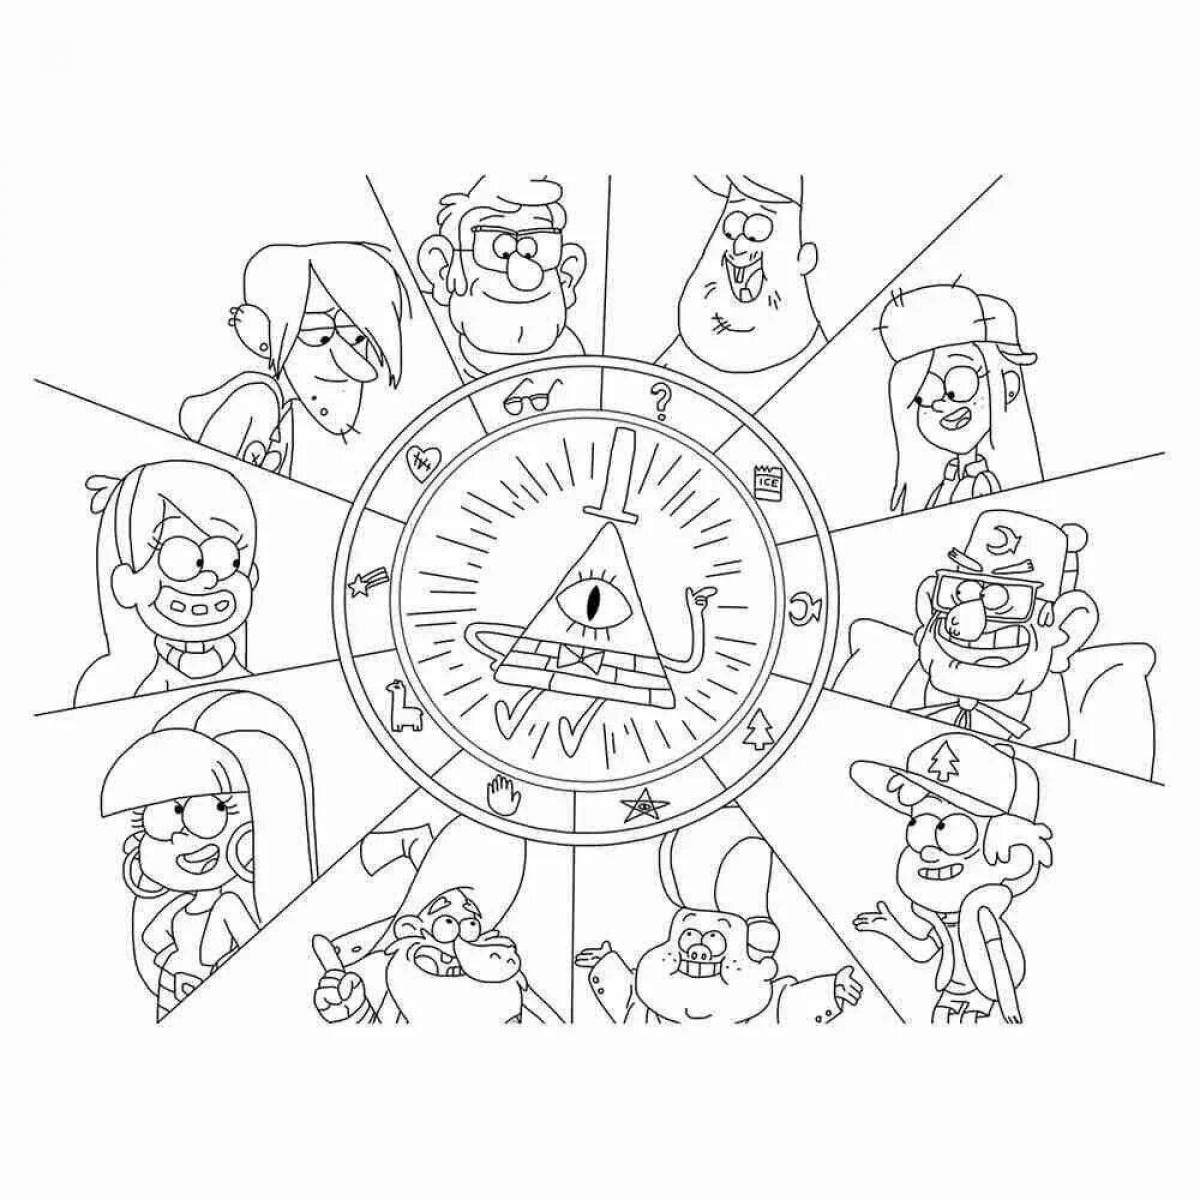 Great gravity falls coloring page